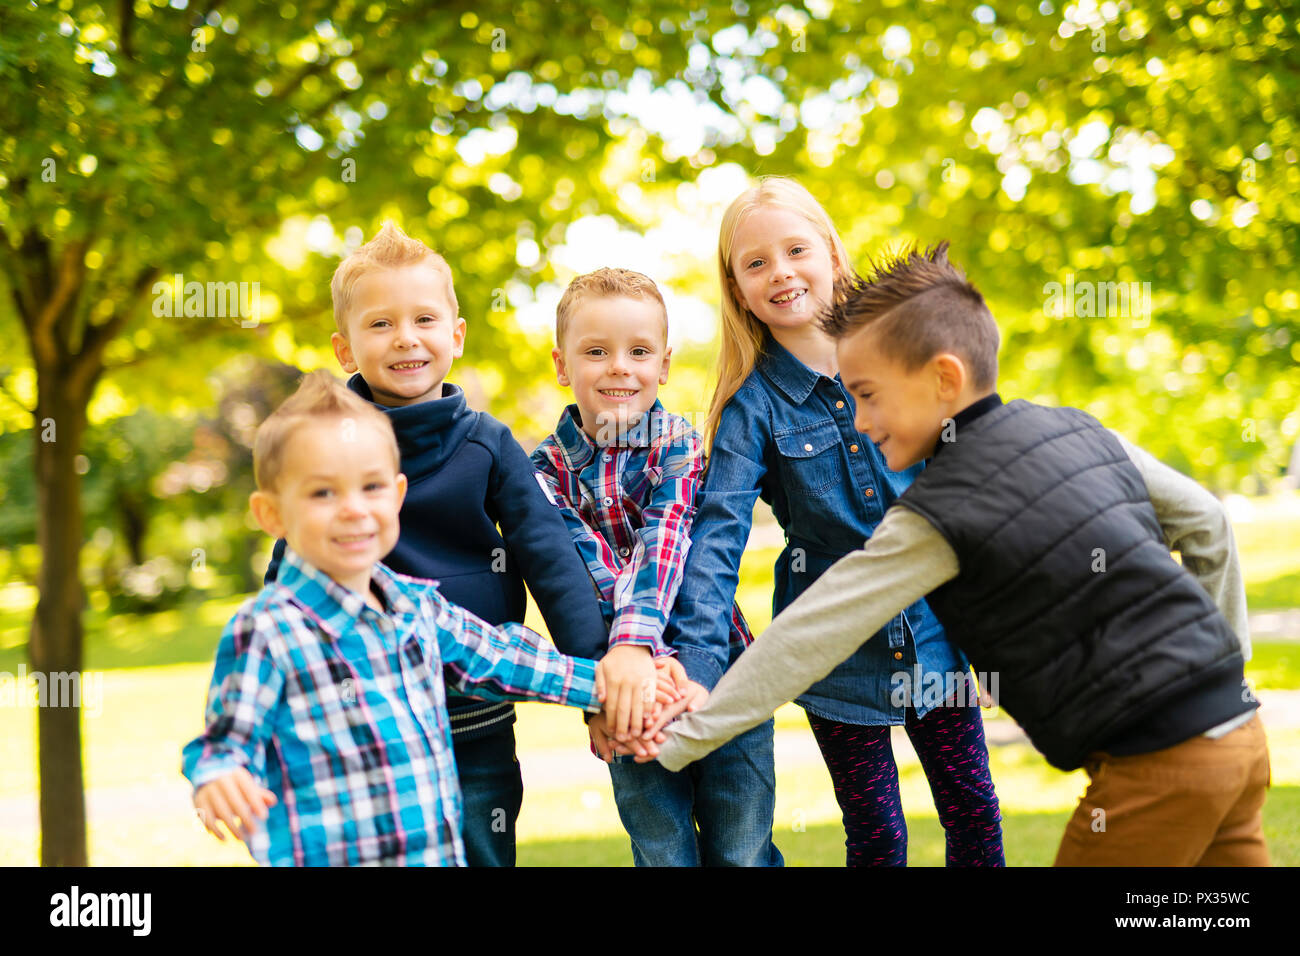 A group of children in spring field having fun Stock Photo